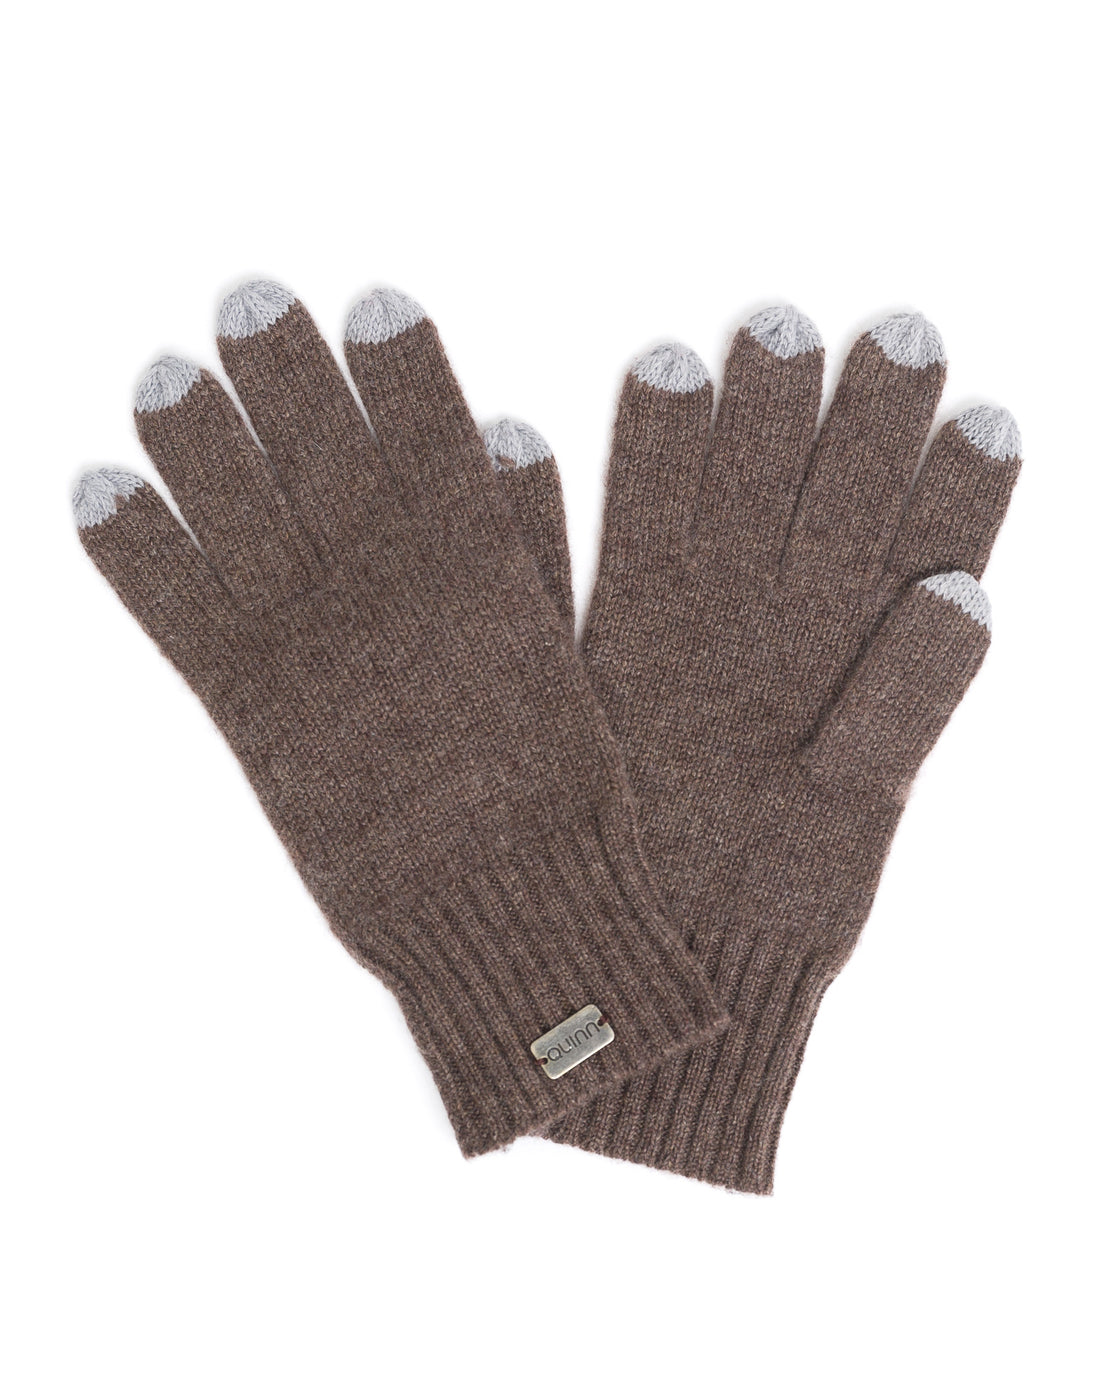 ACCESSORIES - Cashmere Texting Gloves